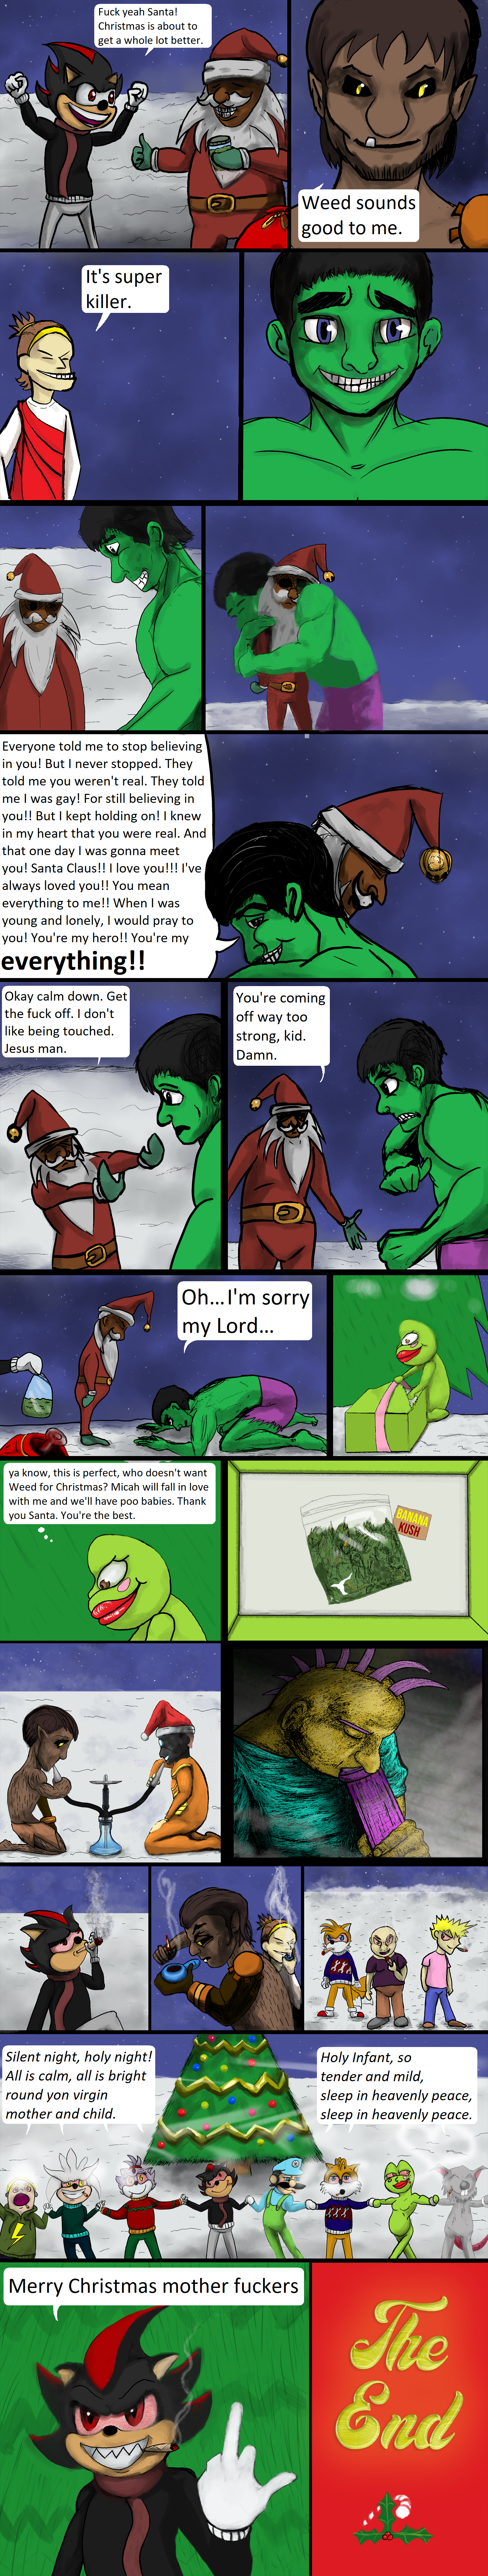 xmas/pg5.png. If you're seeing this, enable images. Or, perhaps we have a website issue. Try refreshing, if unsuccessful email commodorian@tailsgetstrolled.org with a detailed description of how you got here.